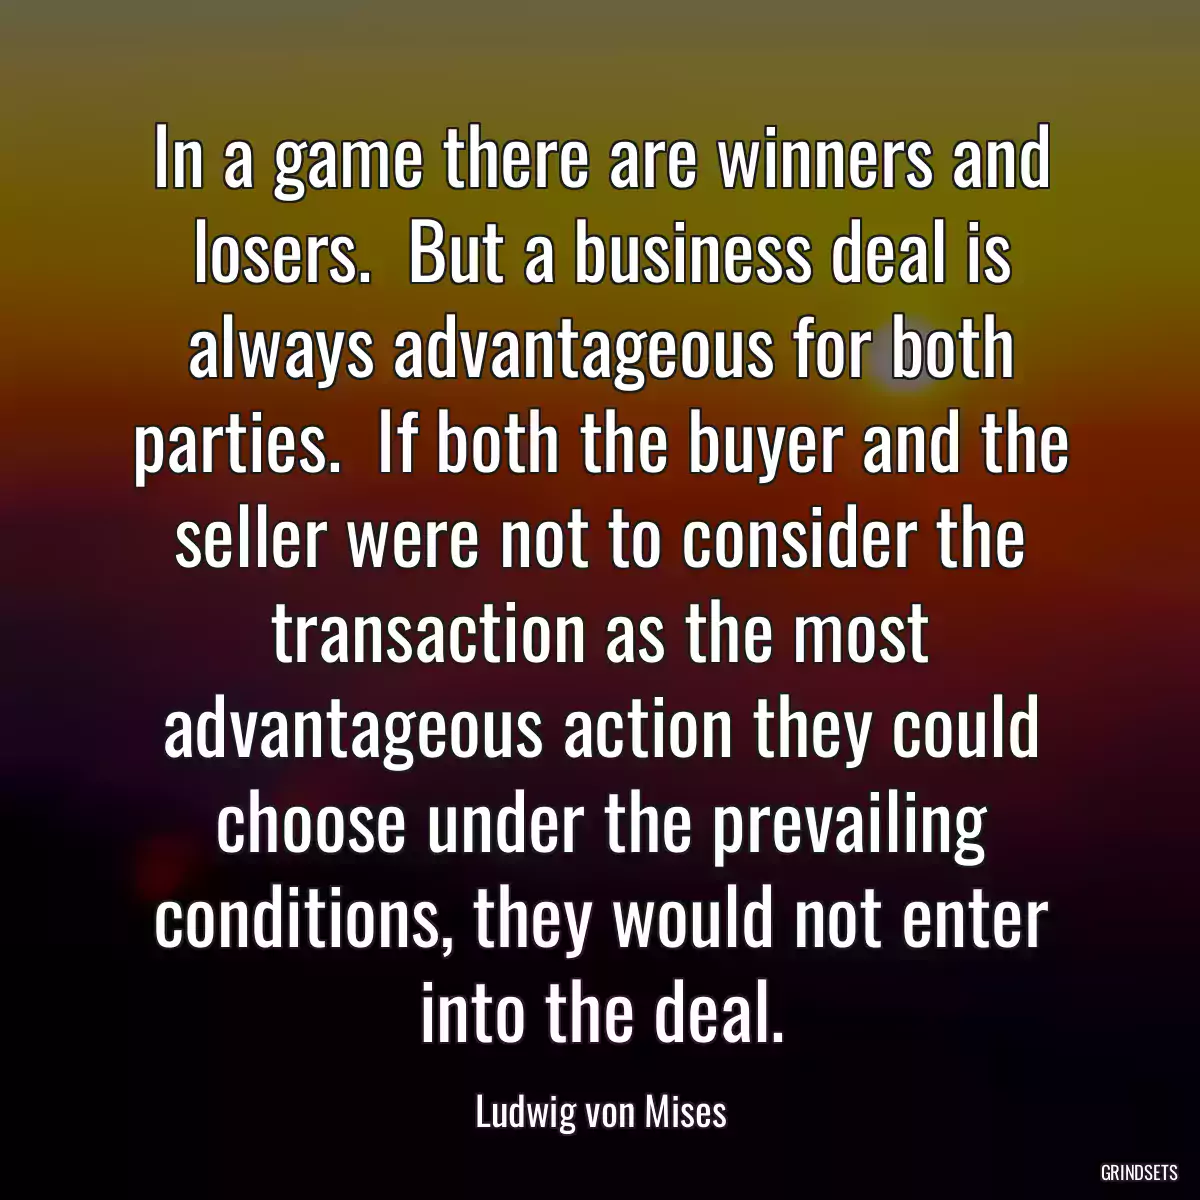 In a game there are winners and losers.  But a business deal is always advantageous for both parties.  If both the buyer and the seller were not to consider the transaction as the most advantageous action they could choose under the prevailing conditions, they would not enter into the deal.